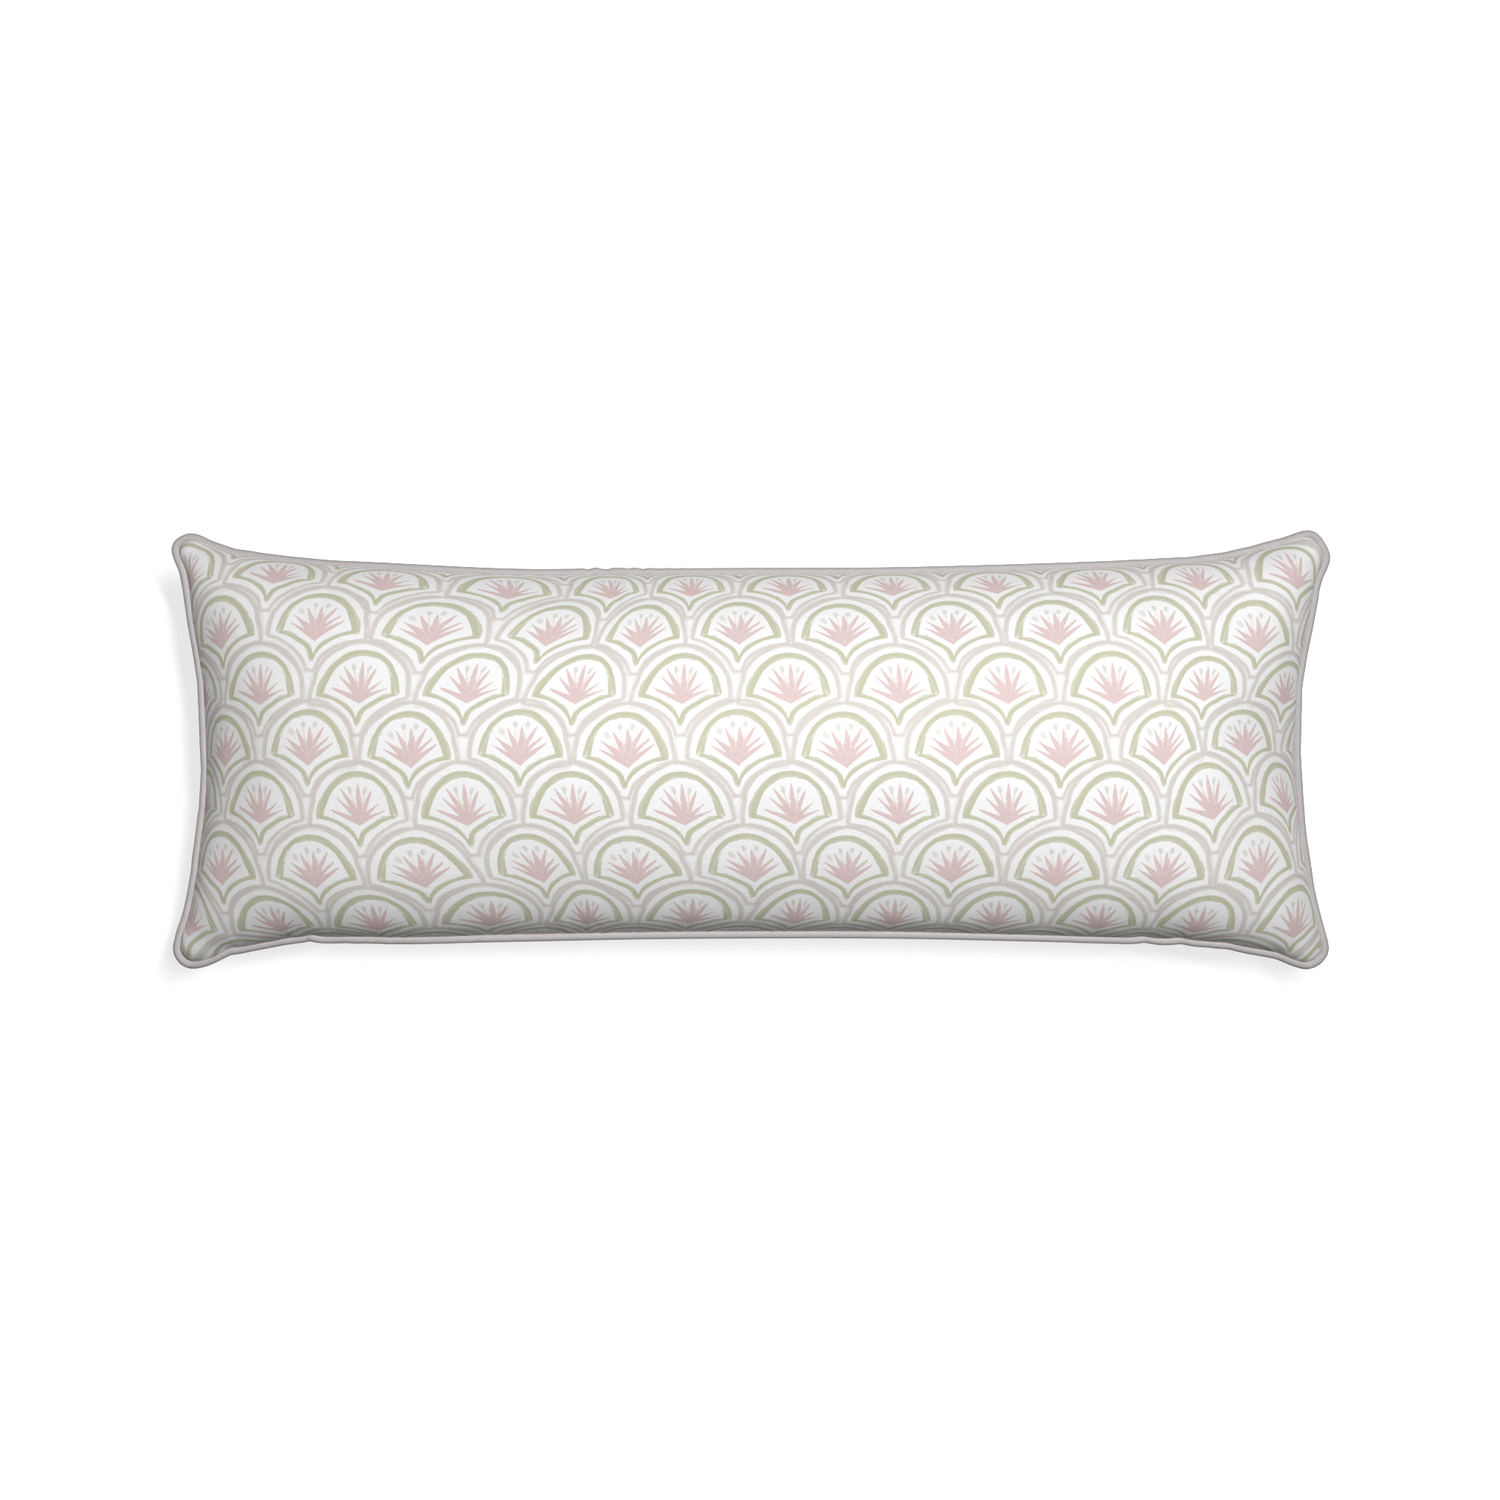 Xl-lumbar thatcher rose custom pillow with pebble piping on white background